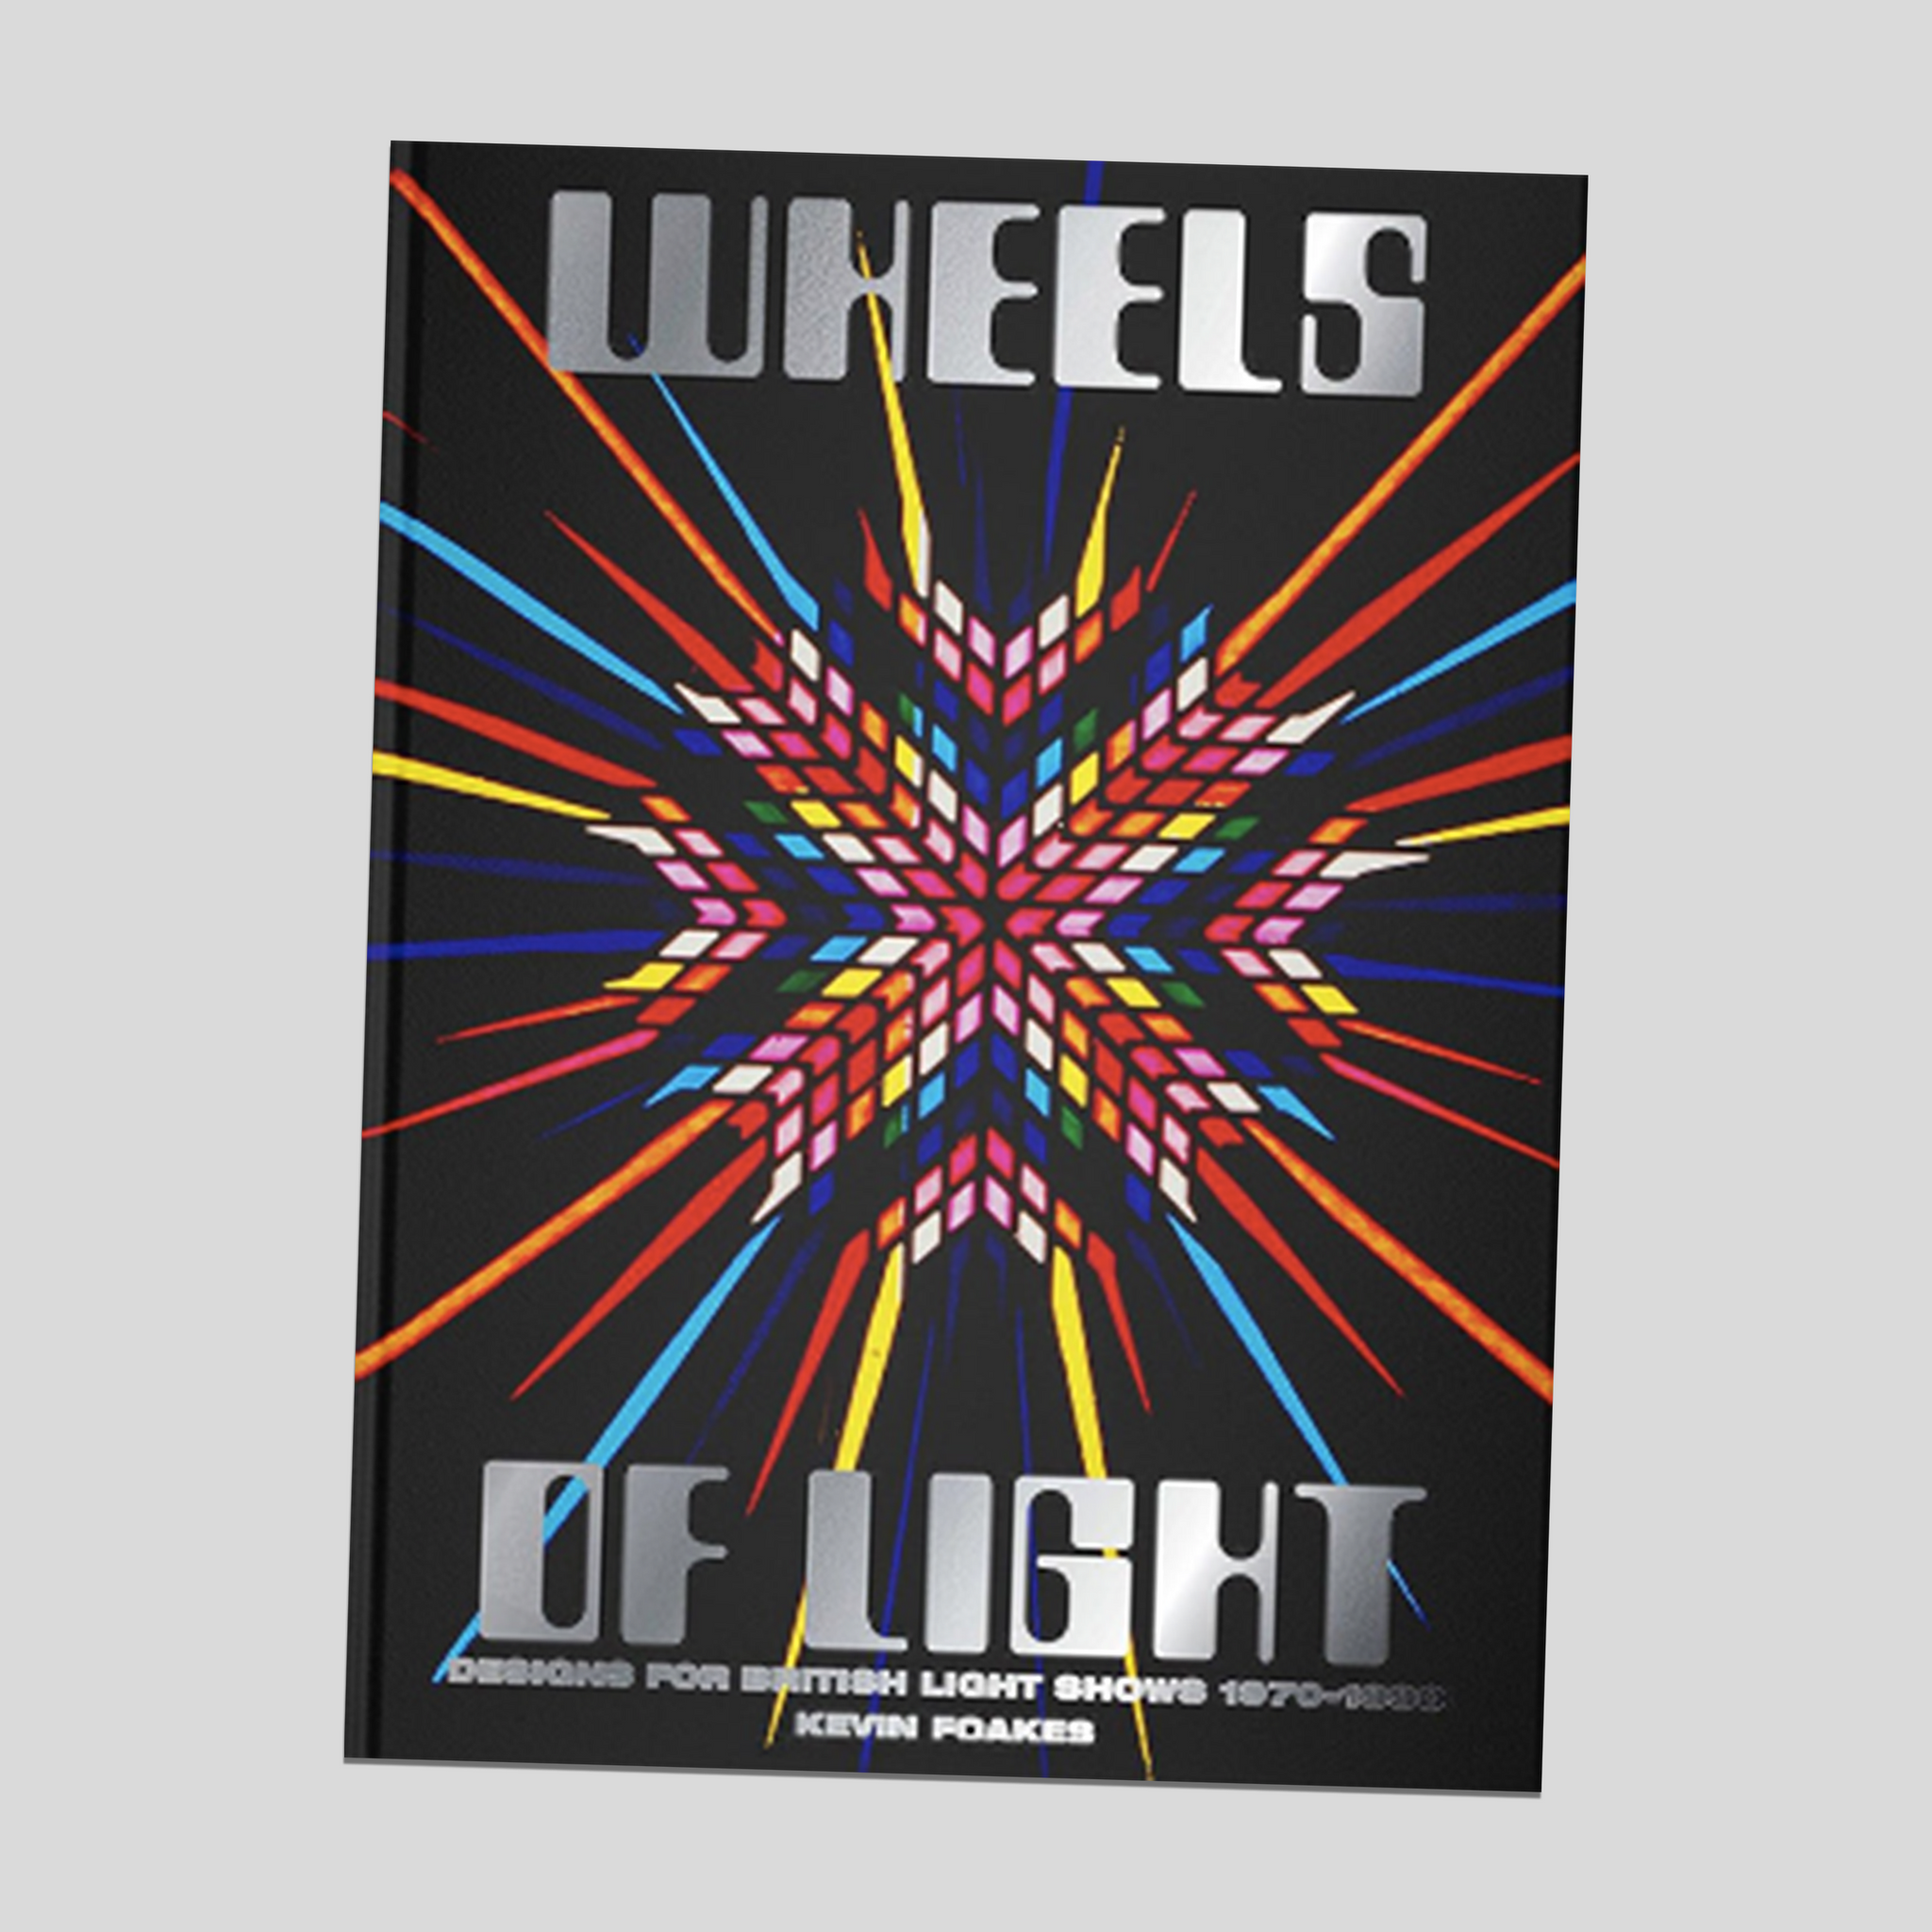 Wheels of Light: Designs for British Light Shows 1970-1990 - Kevin Foakes